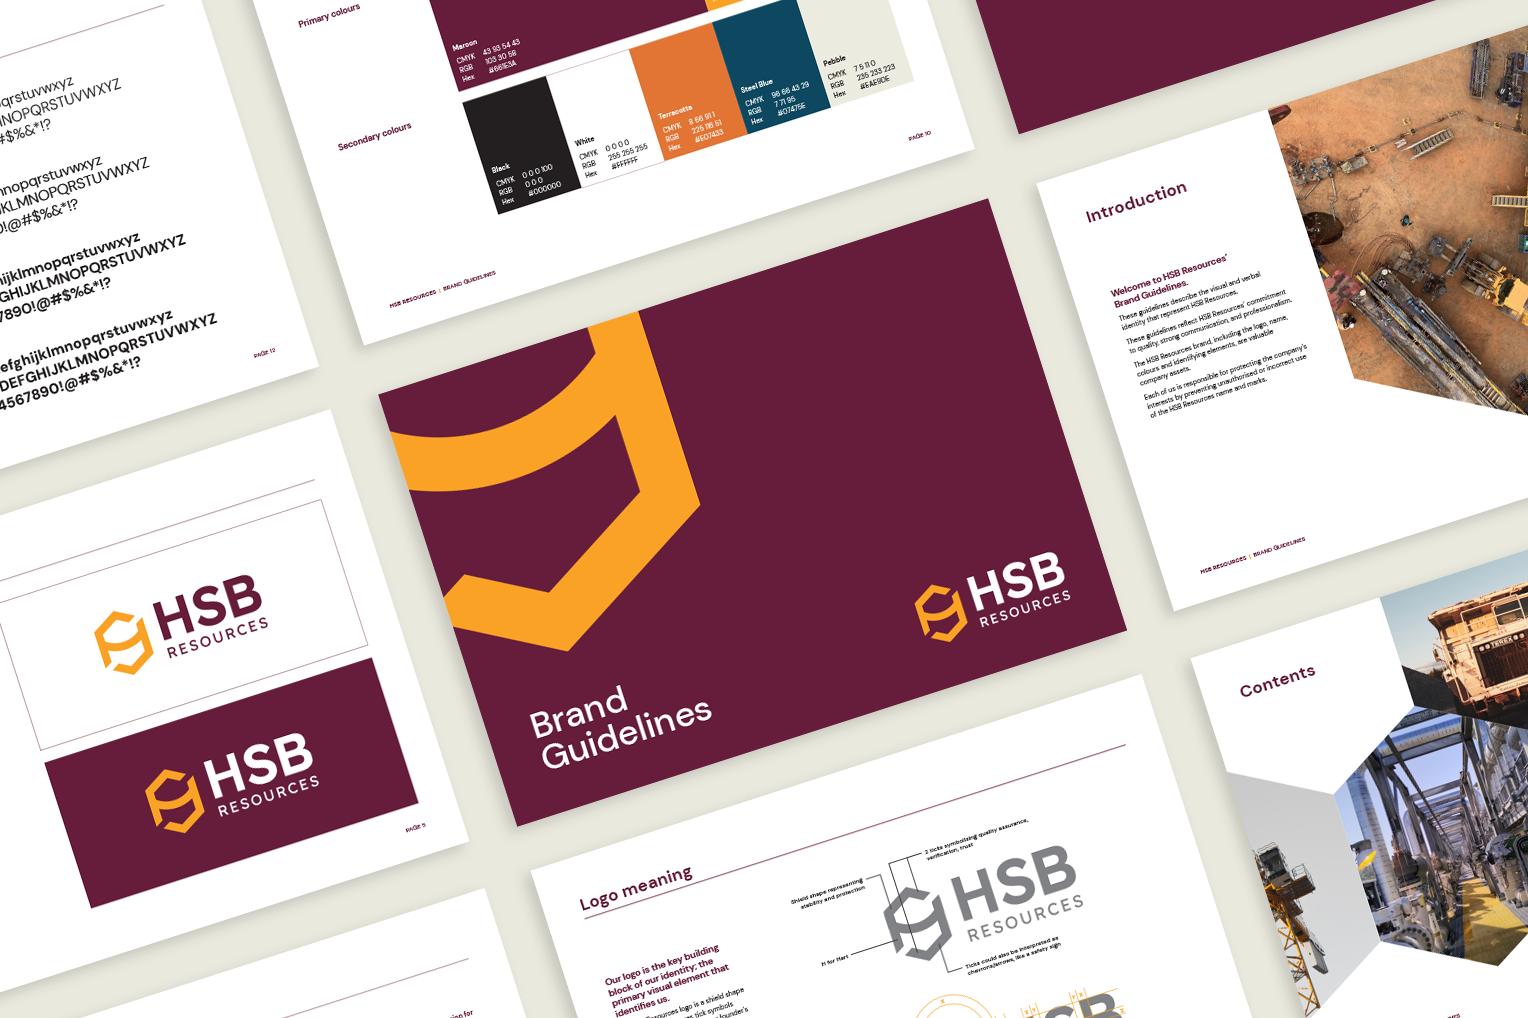 HSB Resources brand guidelines